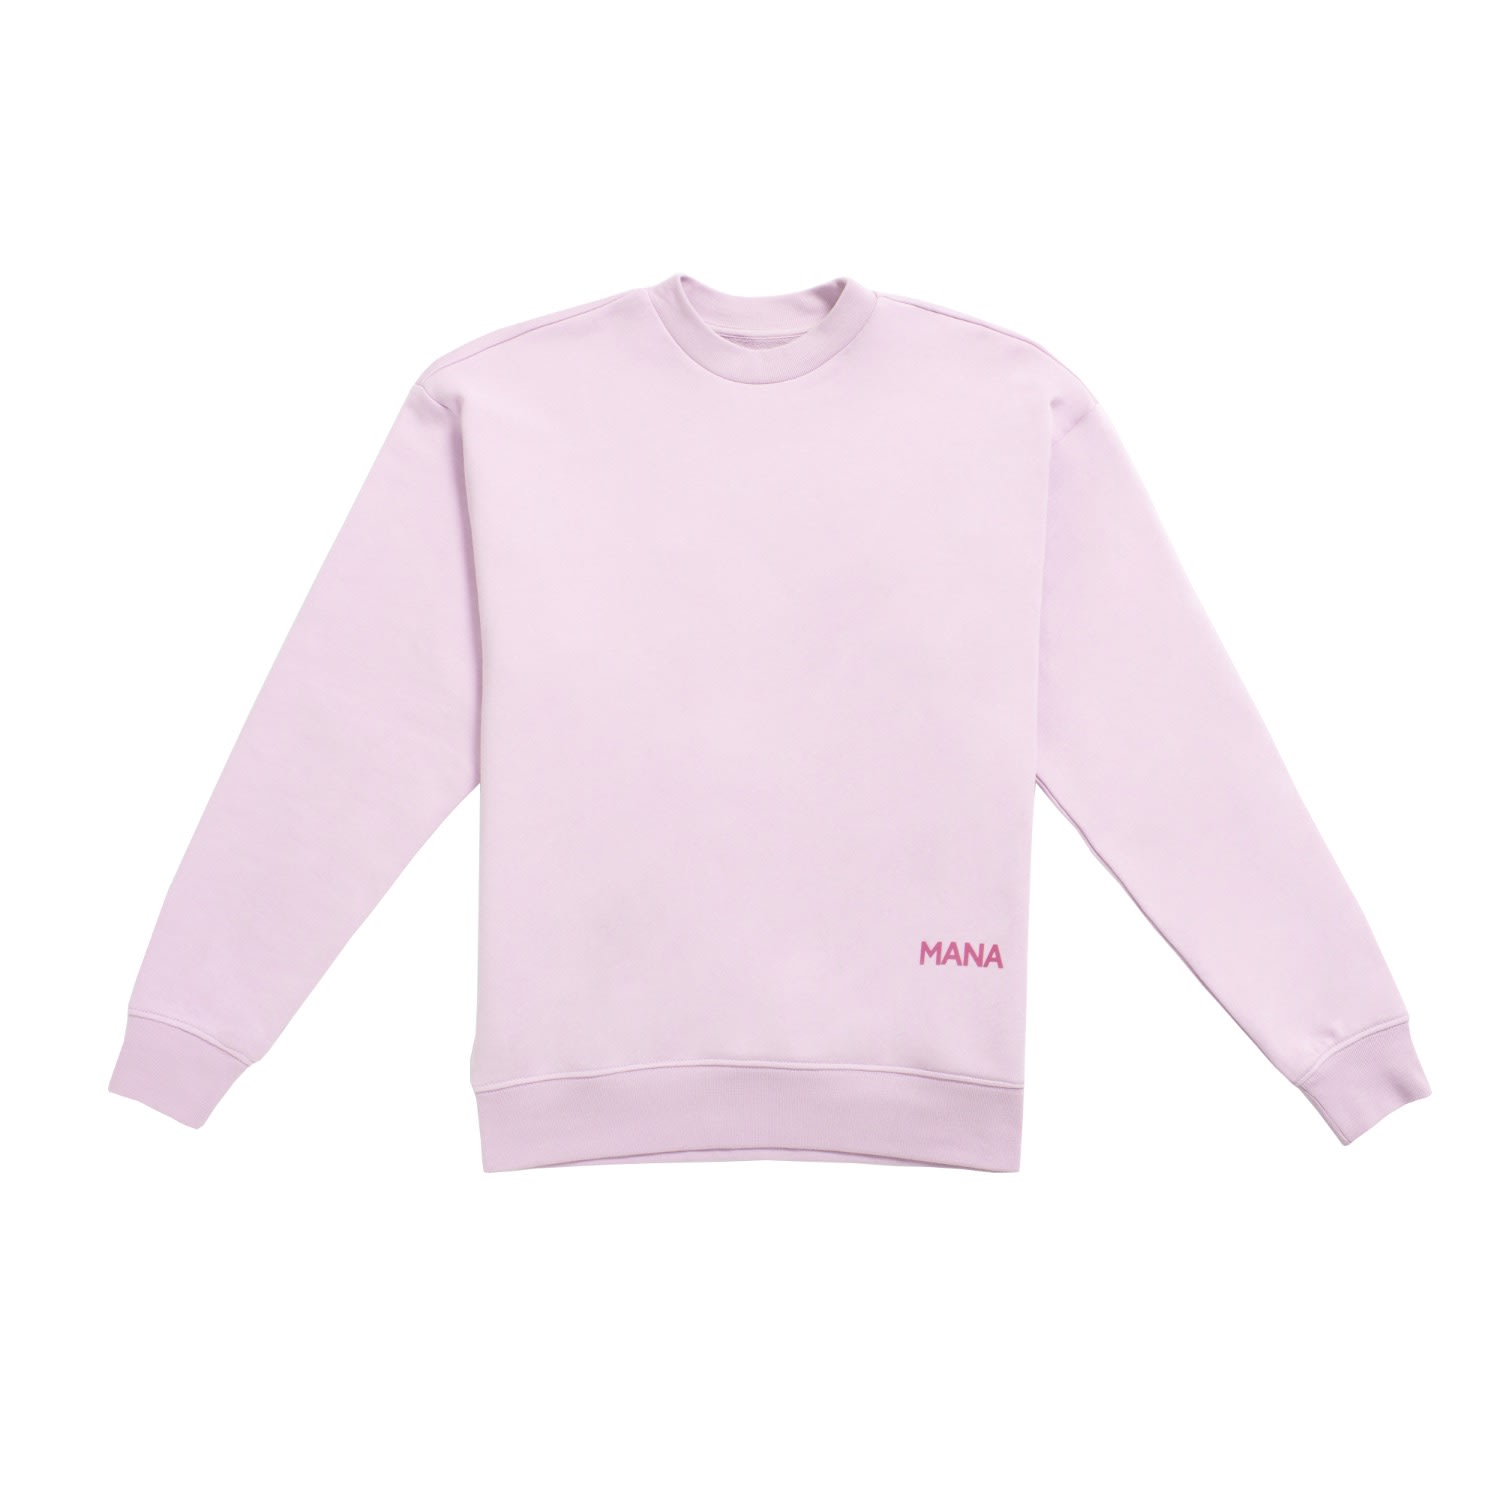 Pink / Purple Premium Edition Sweatshirt Mens In Harbour Island Pink Extra Small MANA The Movement